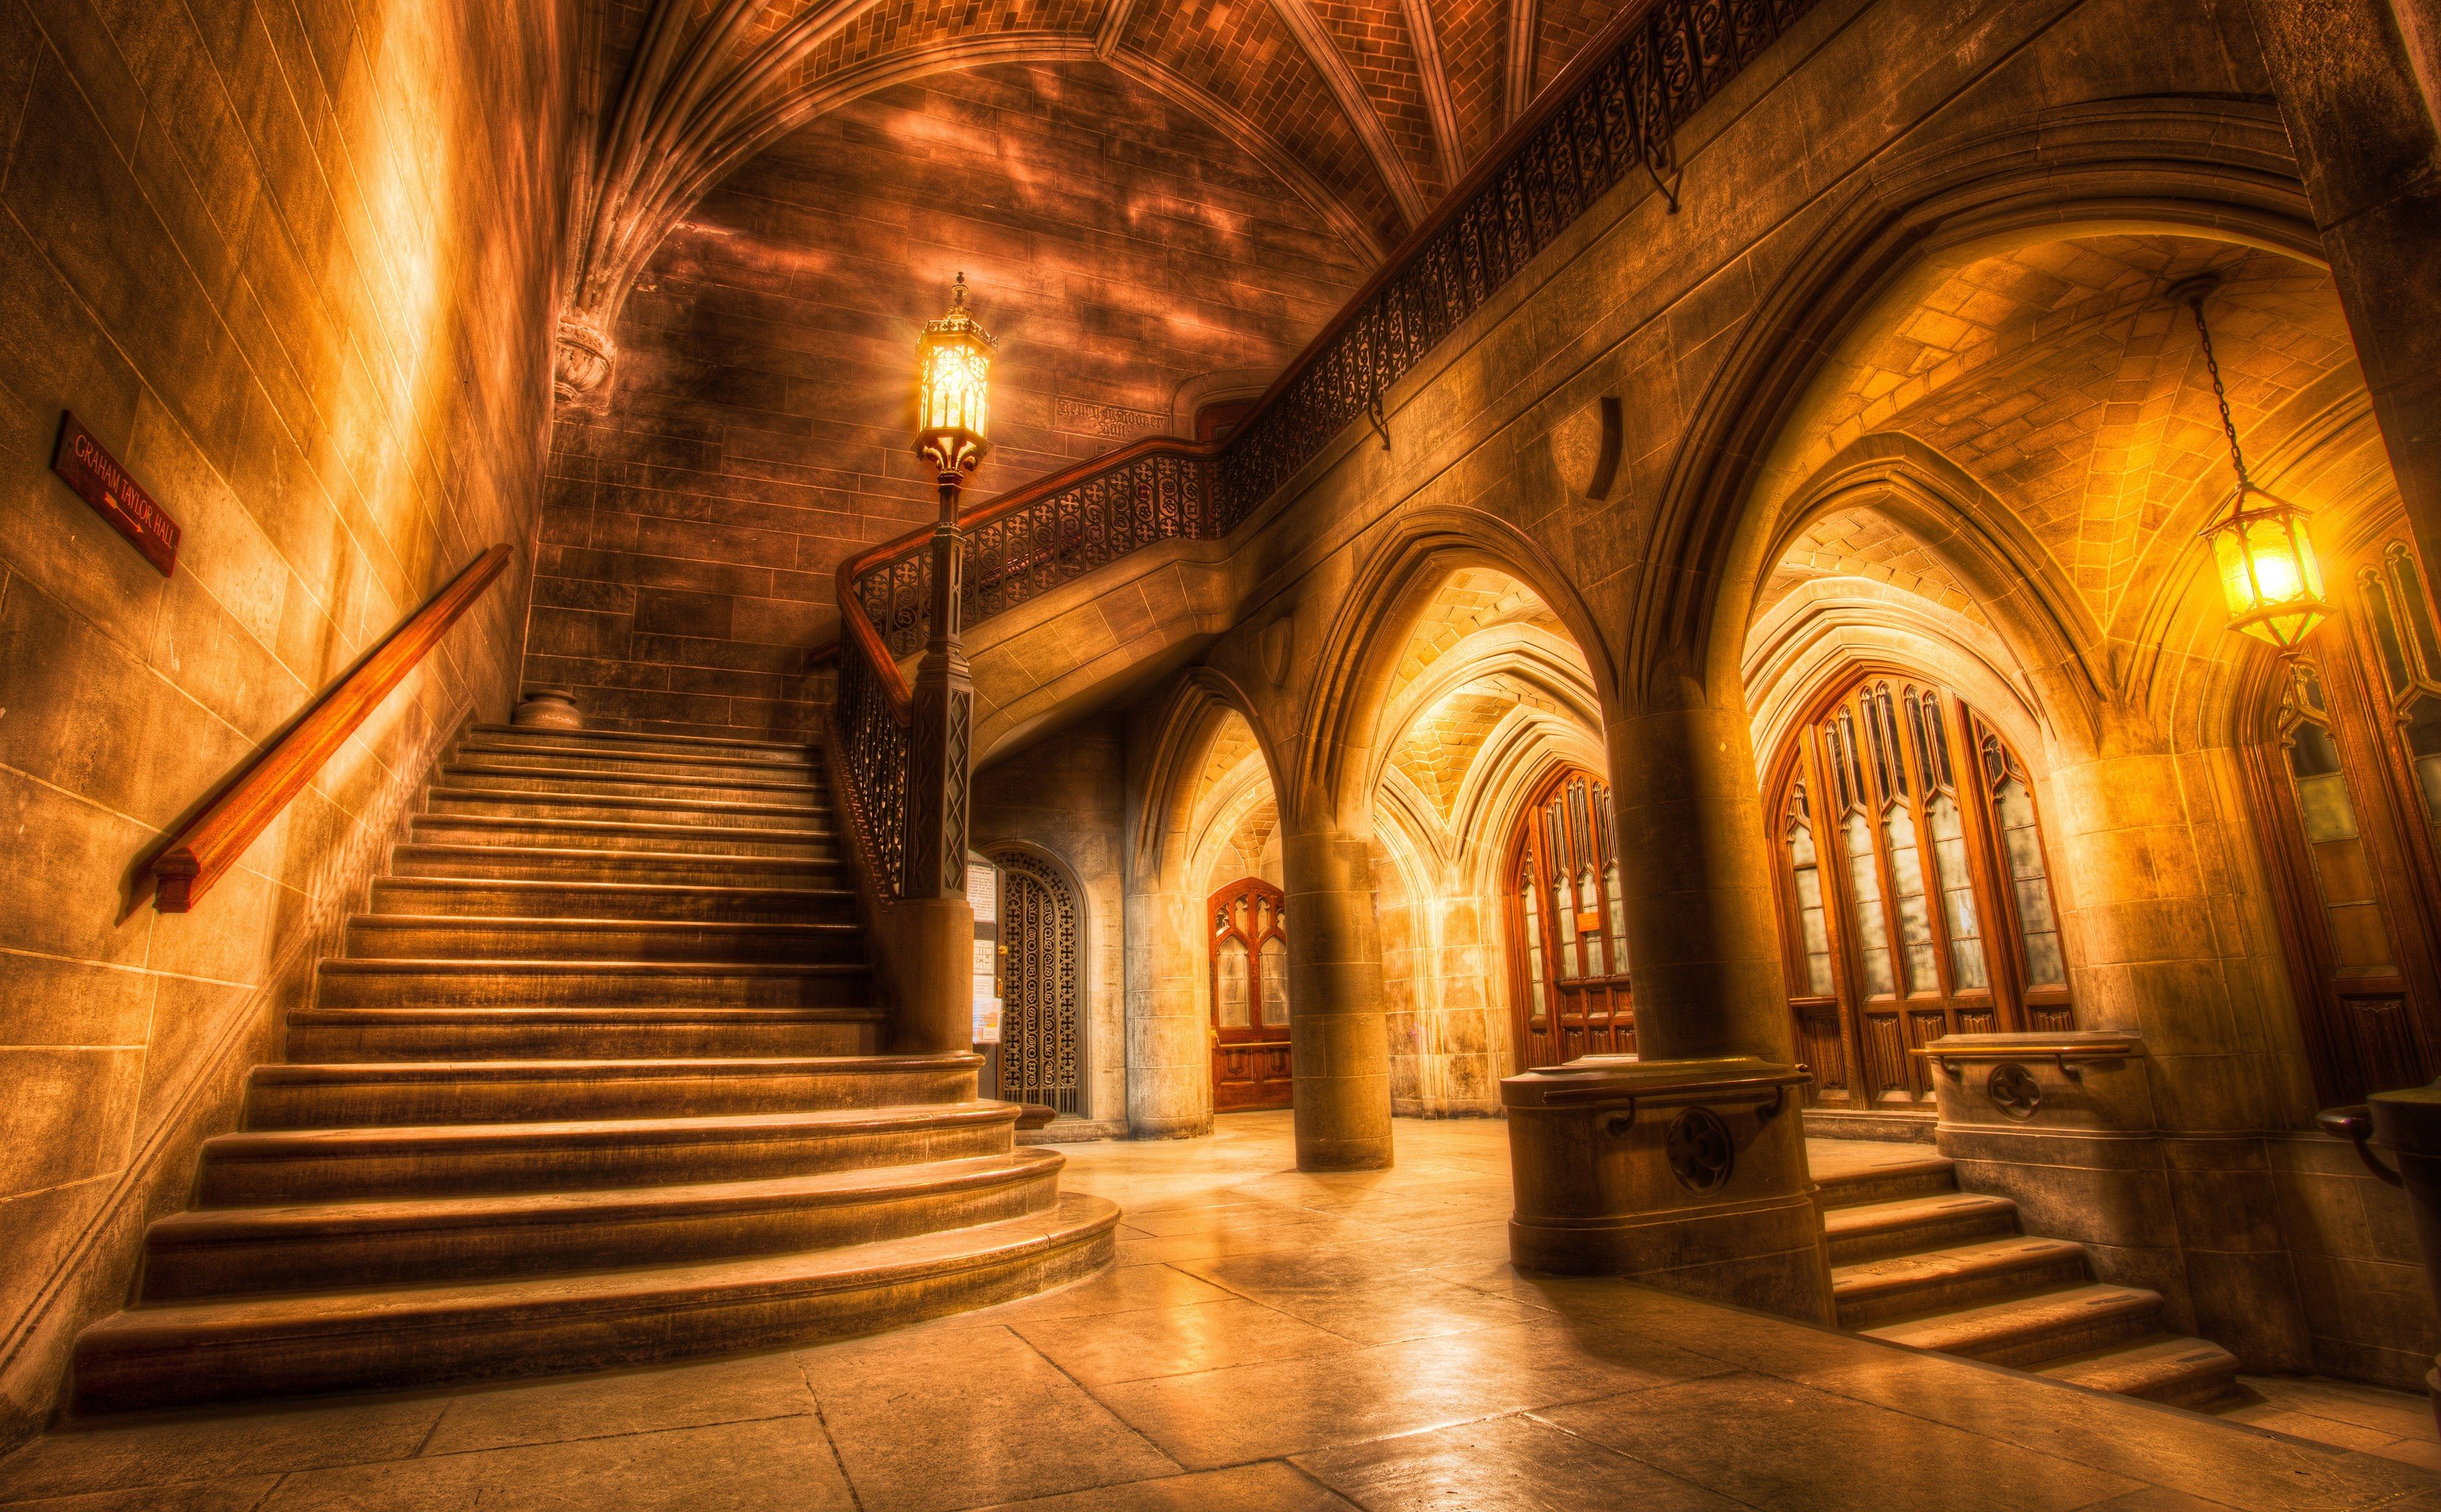 architecture, Interiors, Staircase, HDR, Columns, Chicago, Universities, Arch, Lights, Walls, History, Bricks, Old building, USA Wallpaper